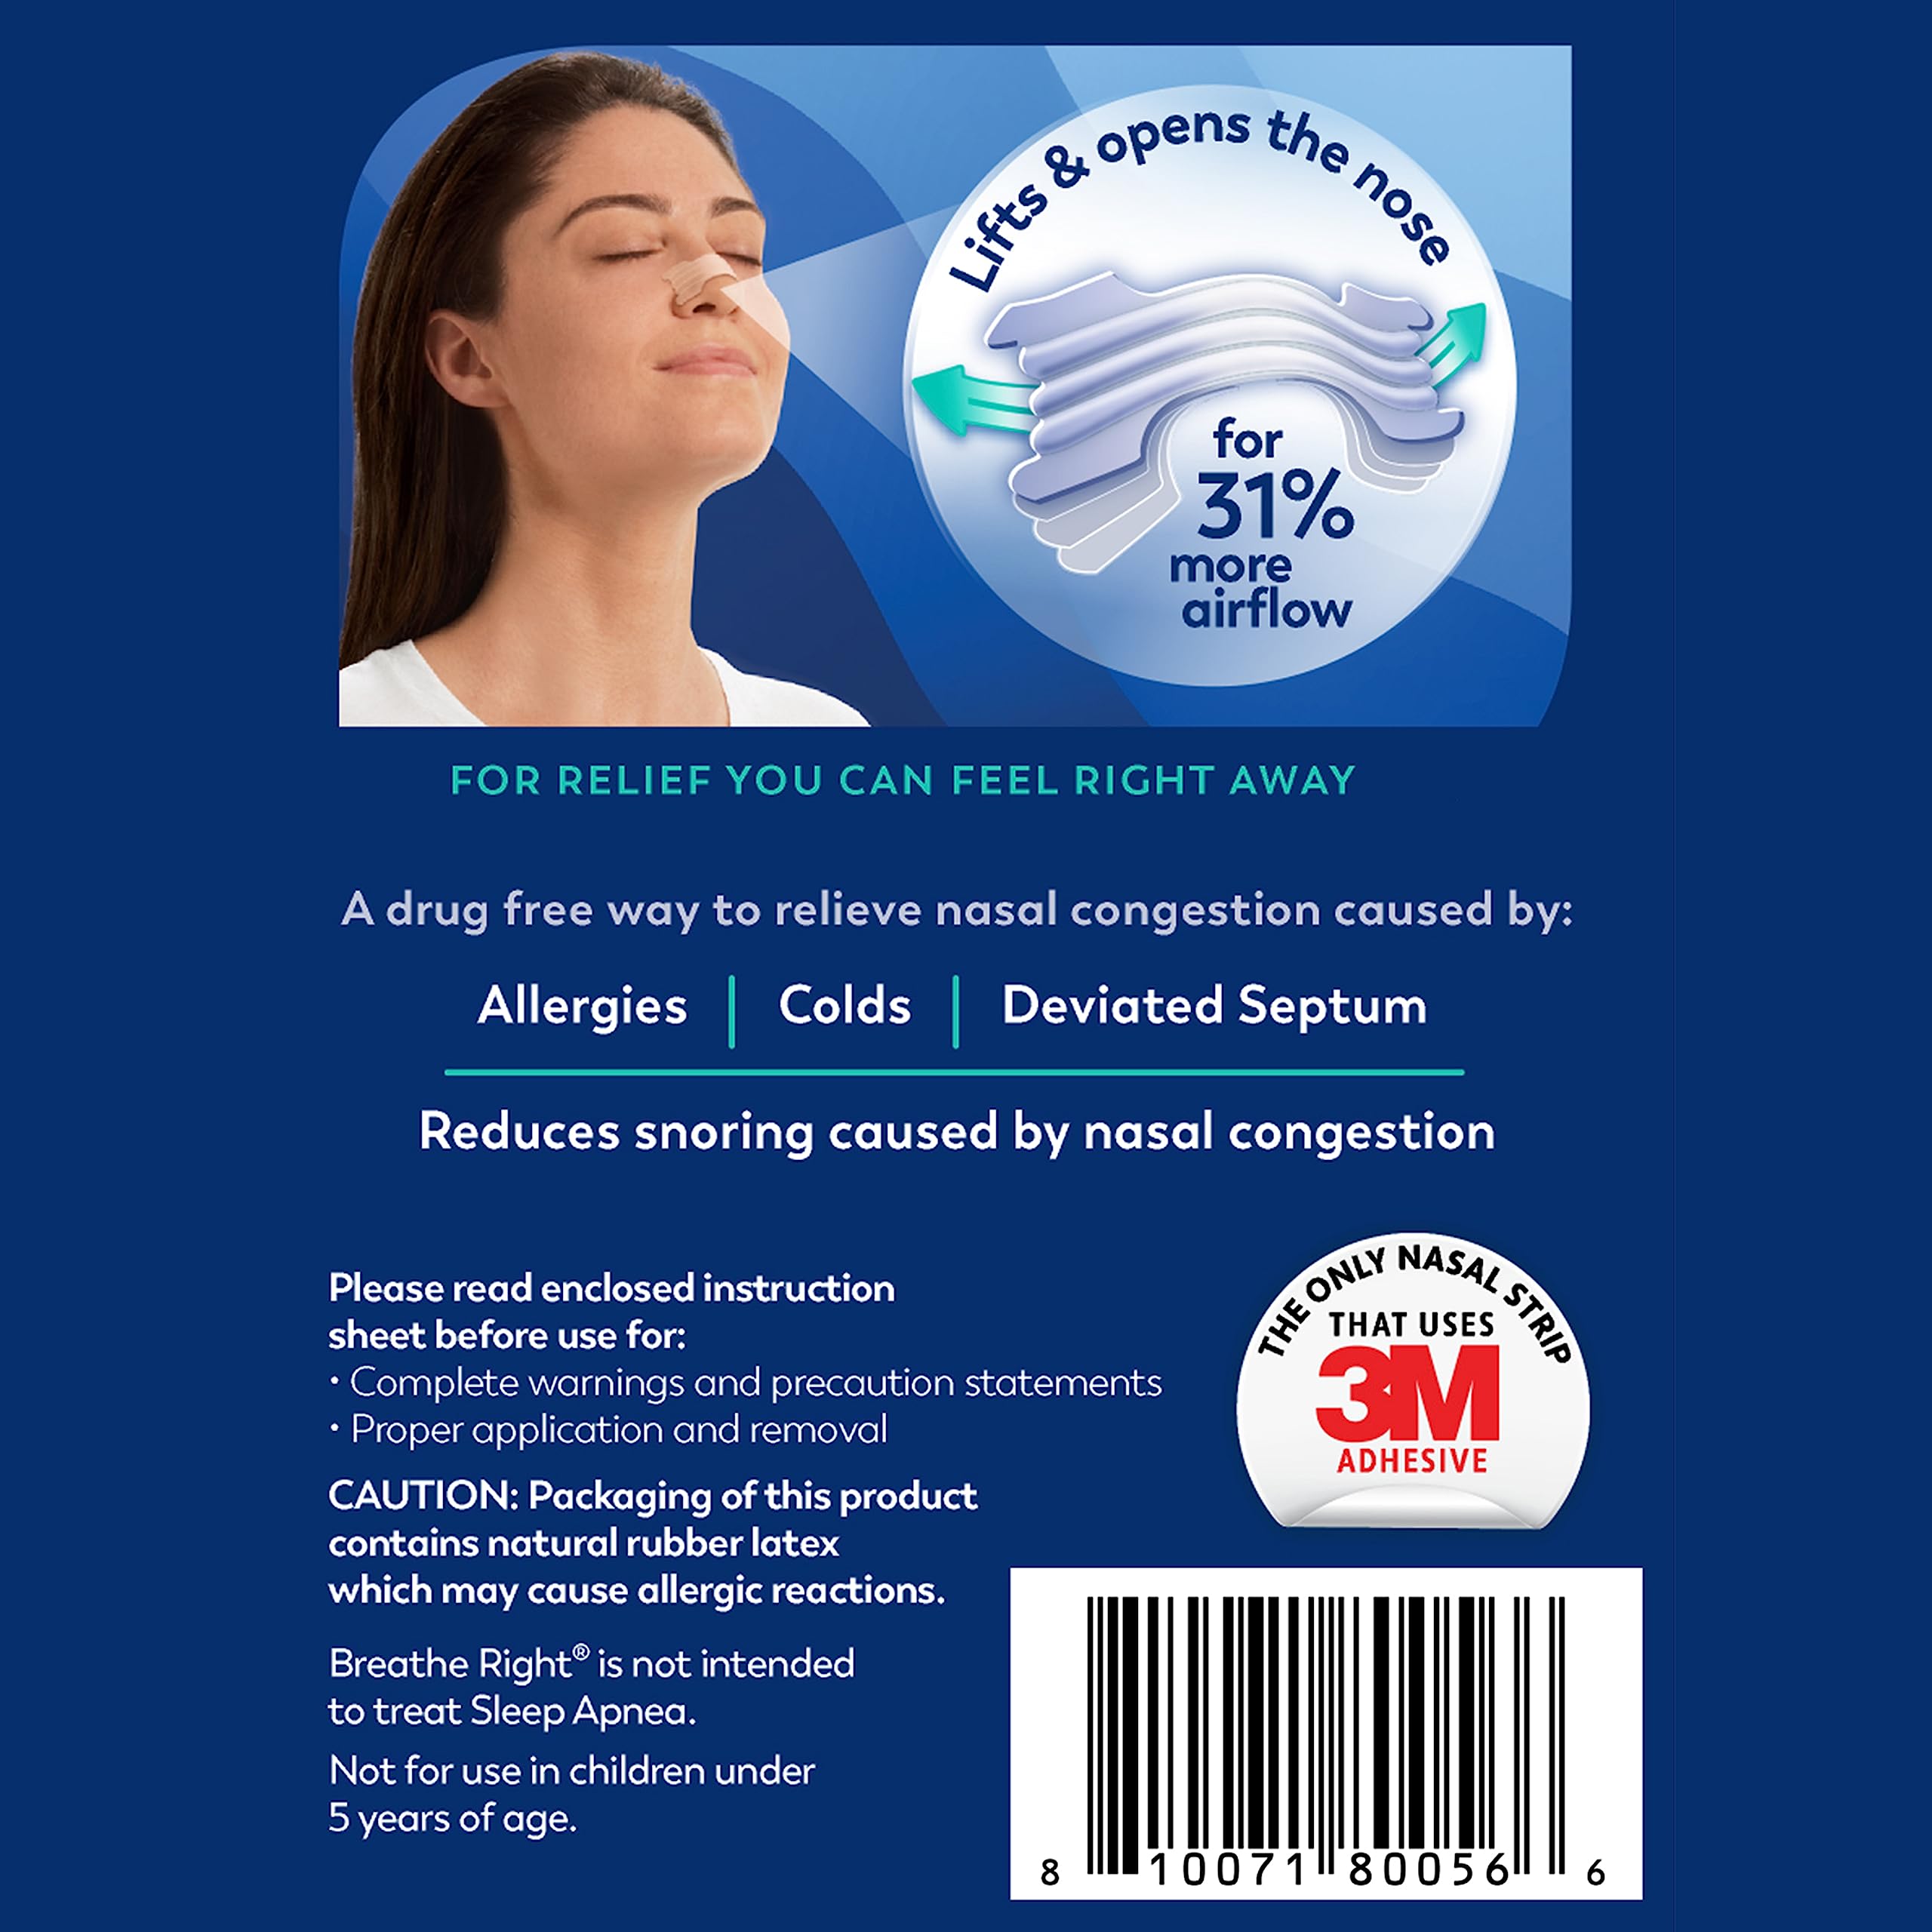 Breathe Right Nasal Strips | Extra Strength | Clear Nasal Strips | For Sensitive Skin | Help Stop Snoring | Drug-Free Snoring Solution & Nasal Congestion Relief Caused by Colds & Allergies | 44 Count